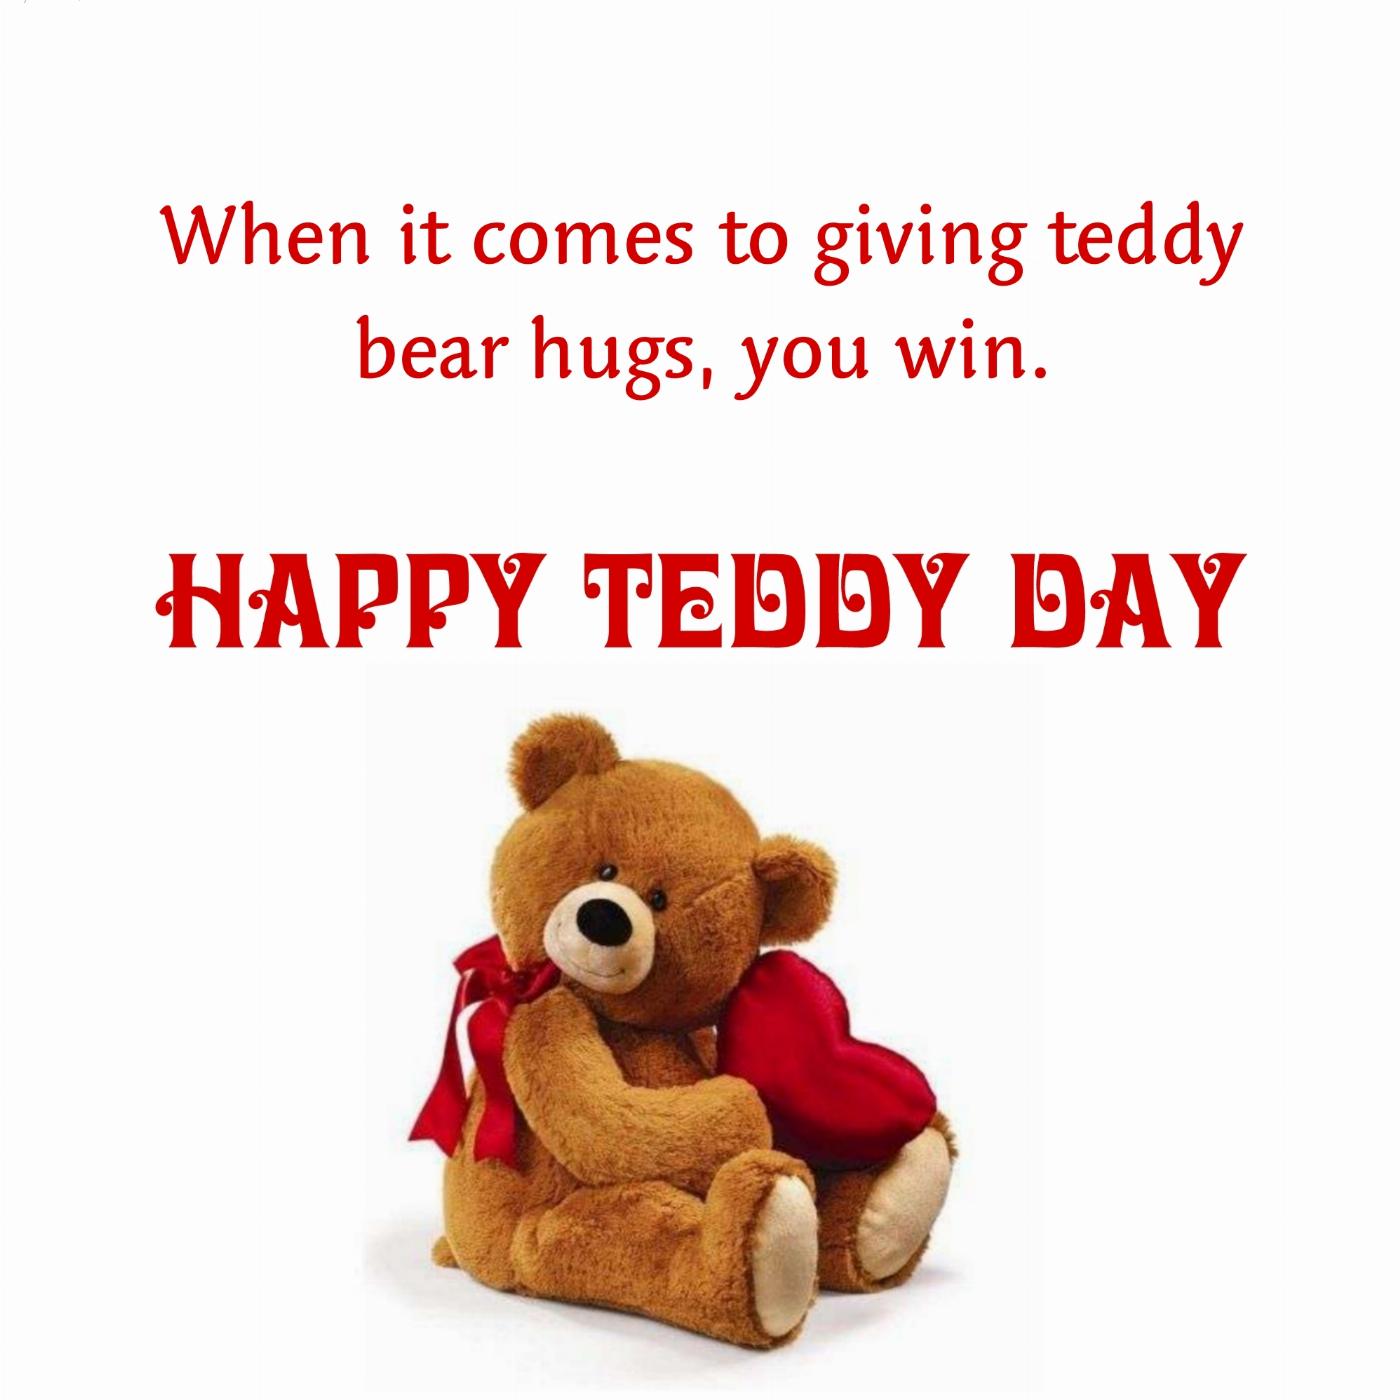 When it comes to giving teddy bear hugs you win